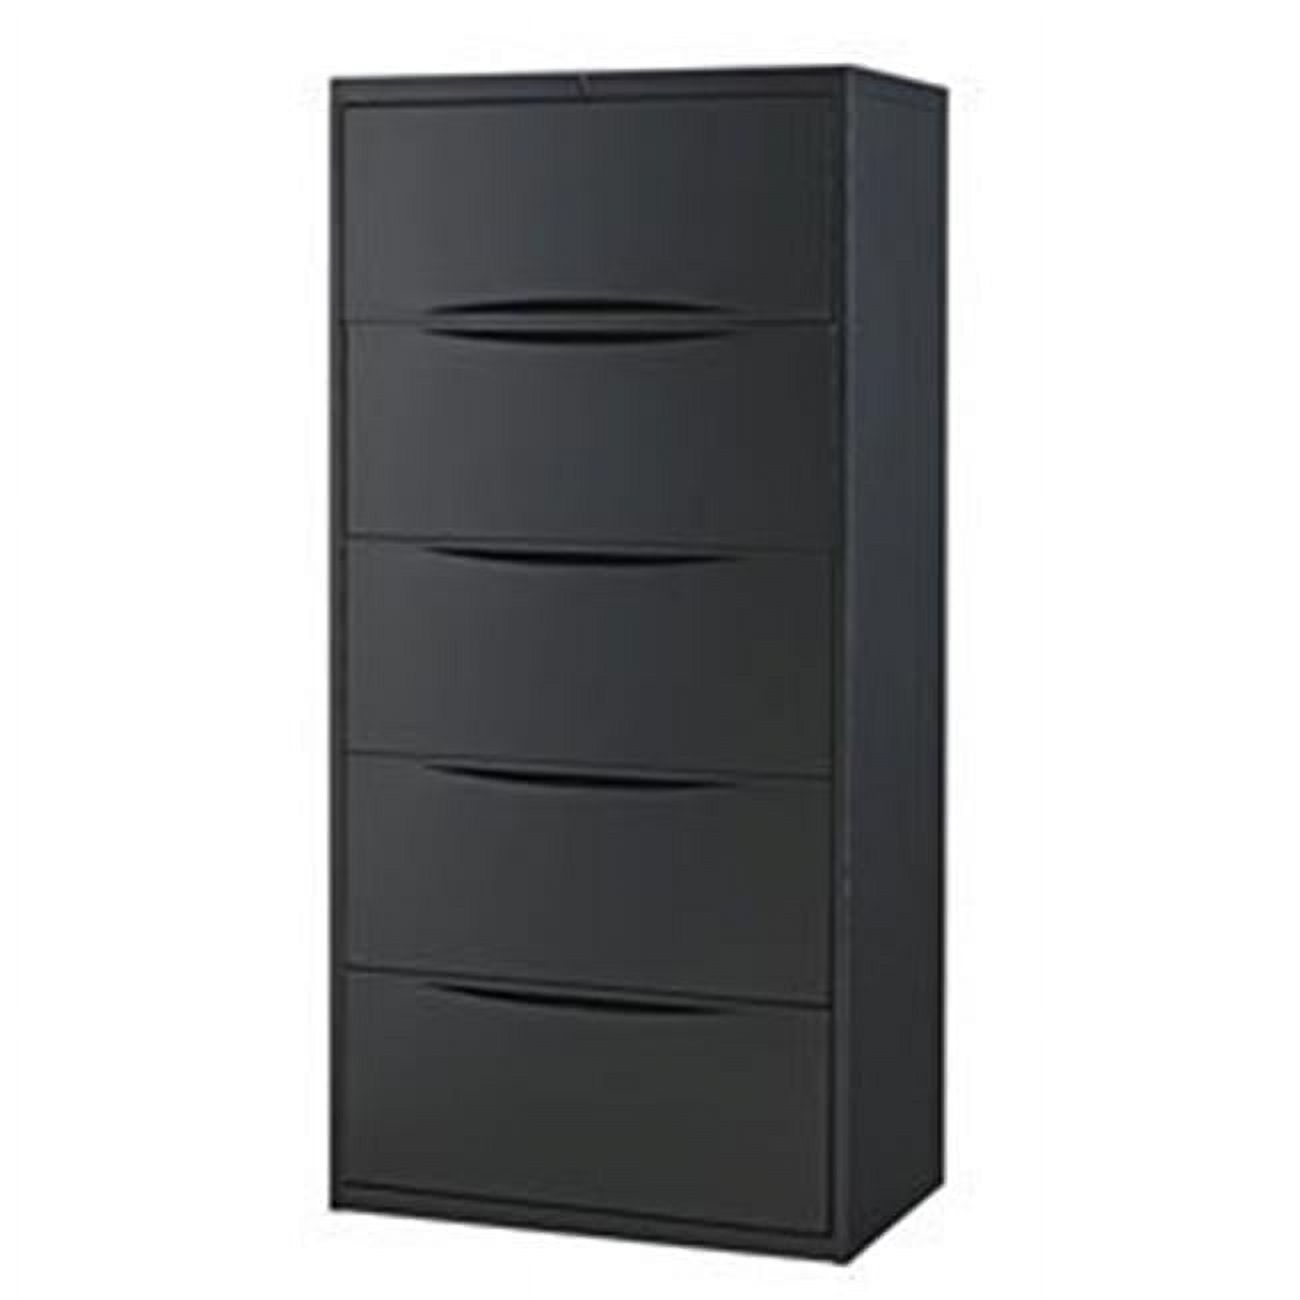 Global Industries 252468BK Interion 30 in. Premium Lateral File Cabinet 5 Drawer, Black - image 1 of 4